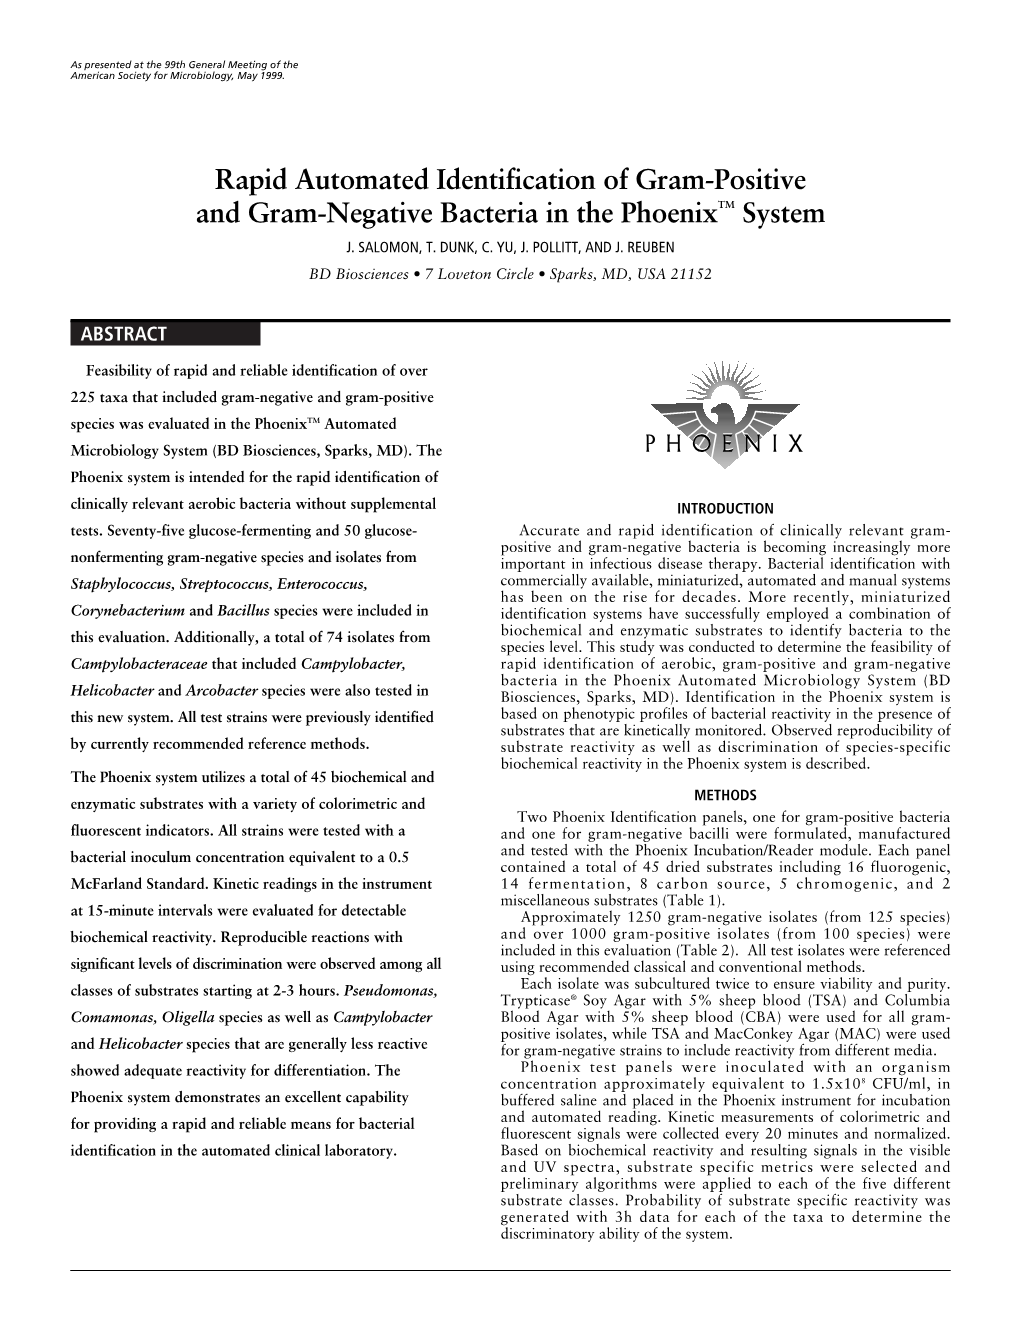 Rapid Automated Identification of Gram-Positive and Gram-Negative Bacteria in the Phoenixtm System J